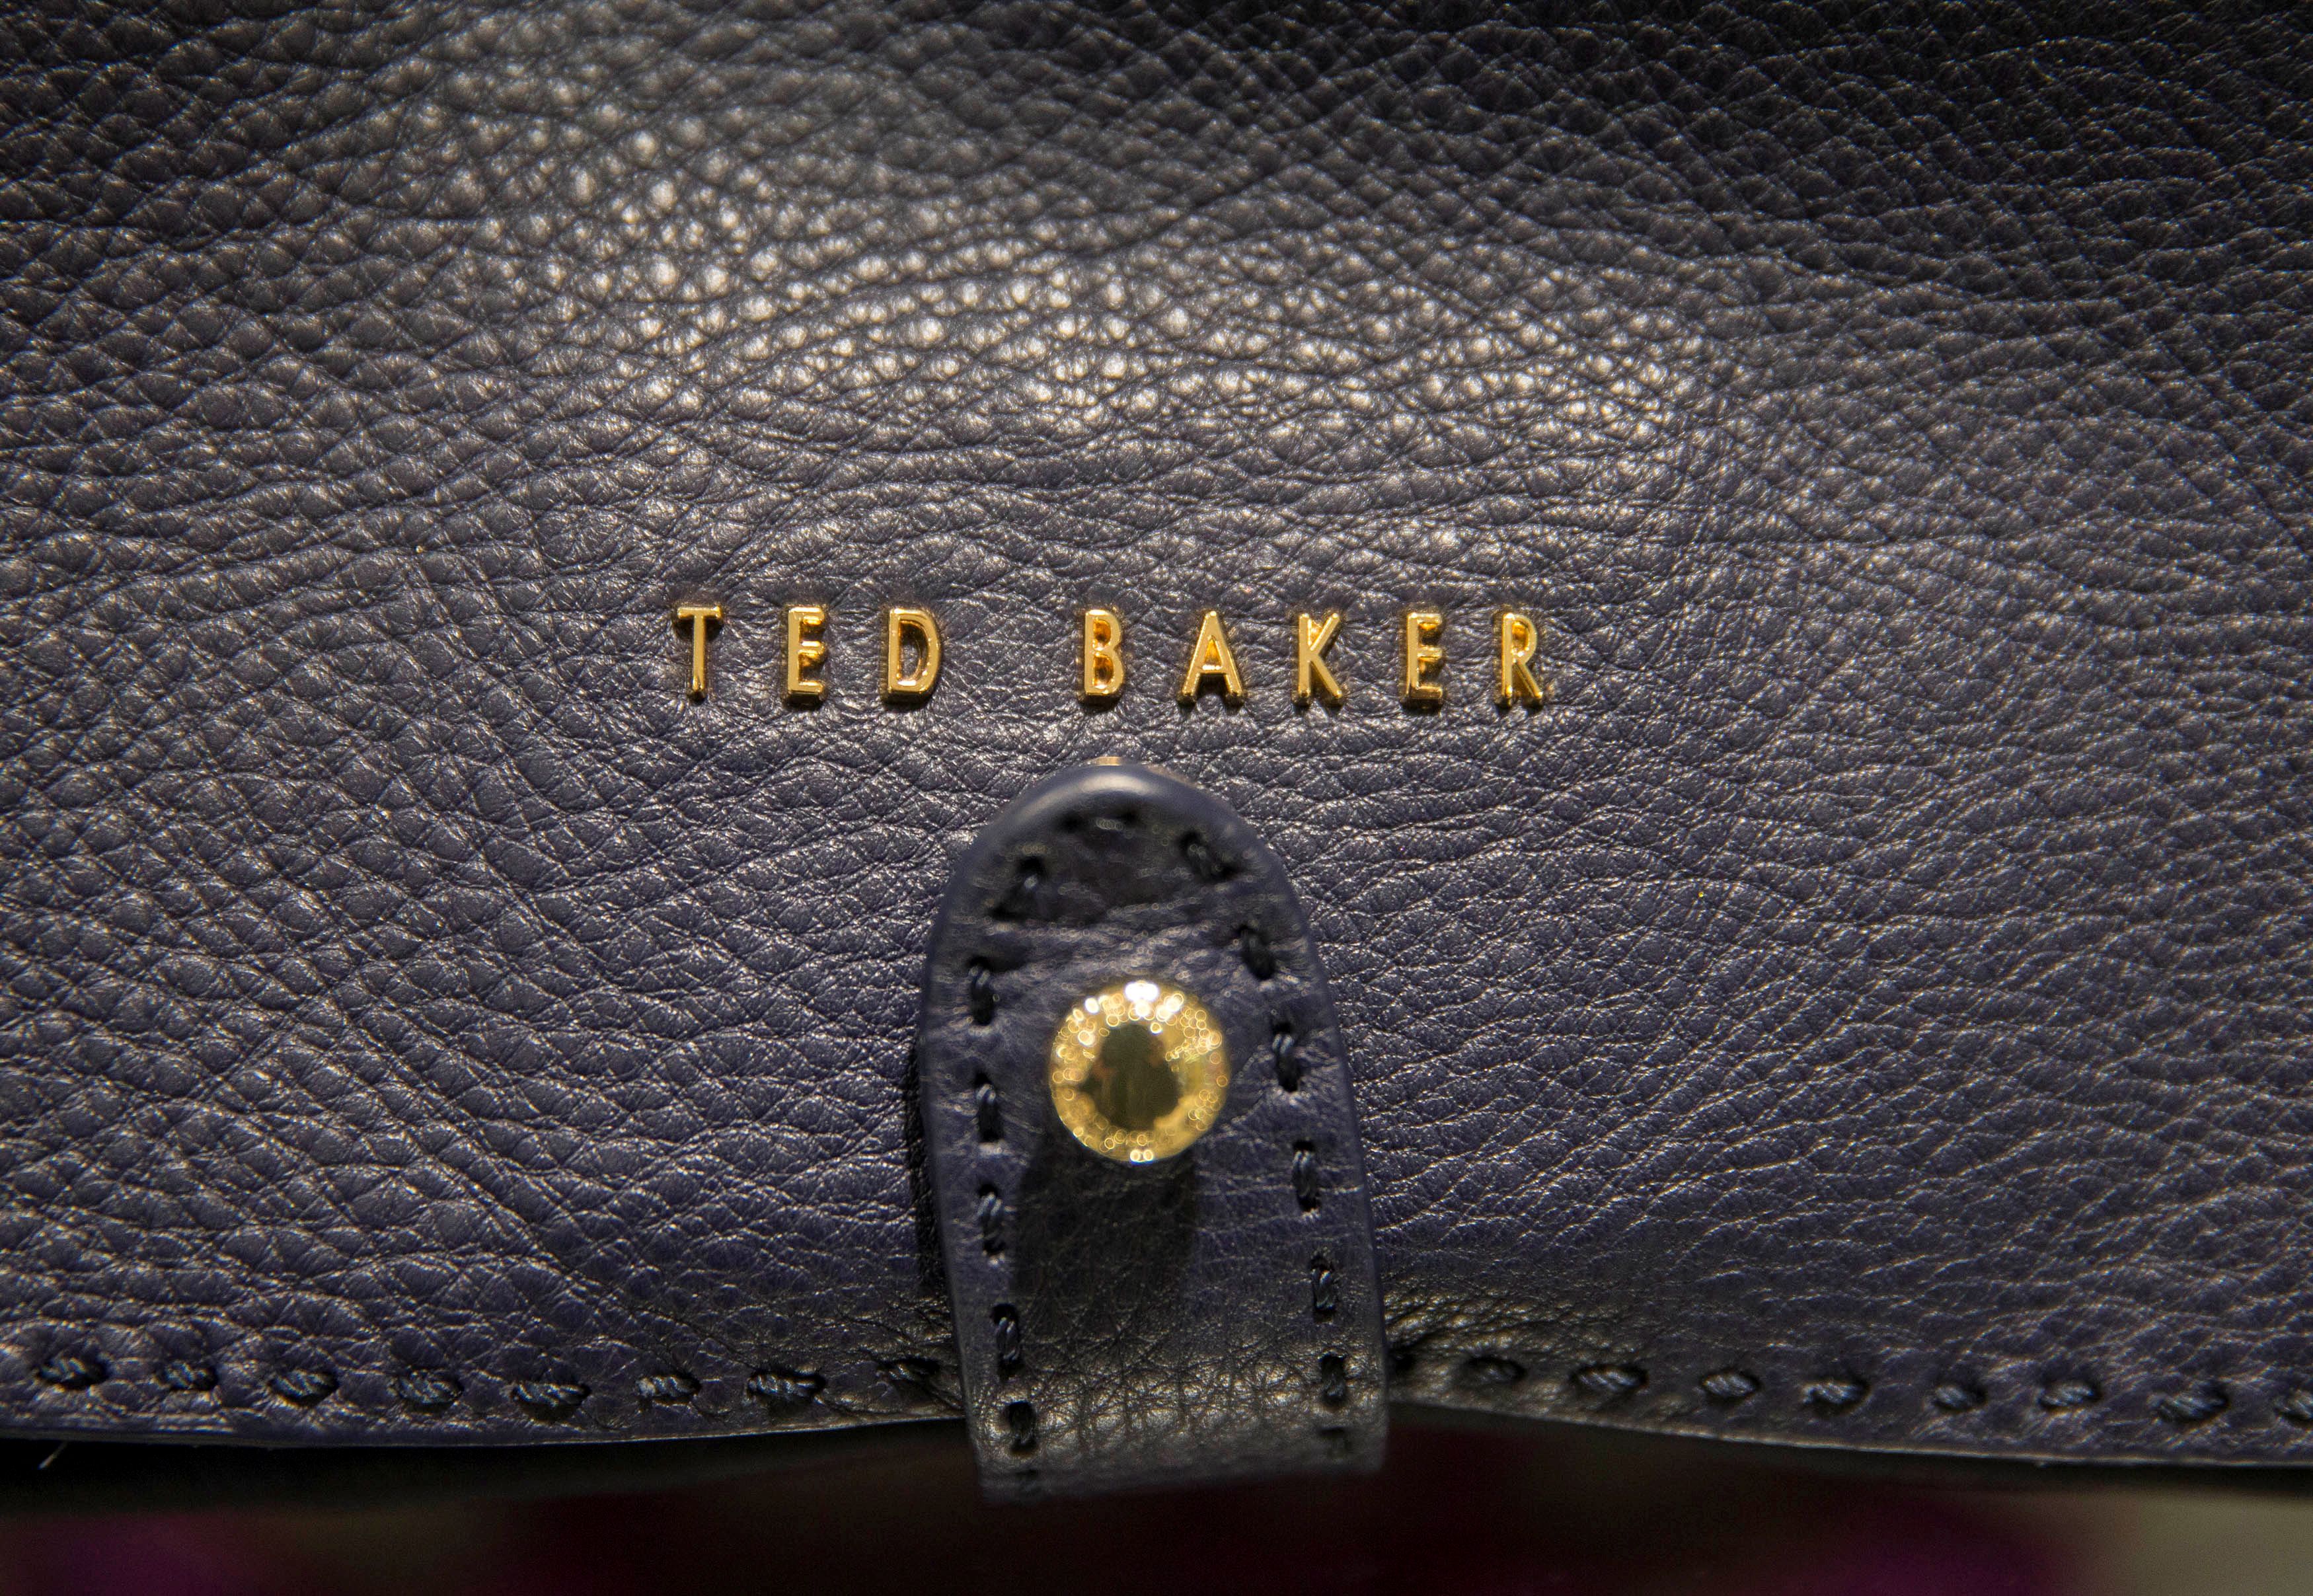 The Ted Baker brand is displayed on a bag in a store in London, Britain October 06, 2015.  REUTERS/Neil Hall/File Photo